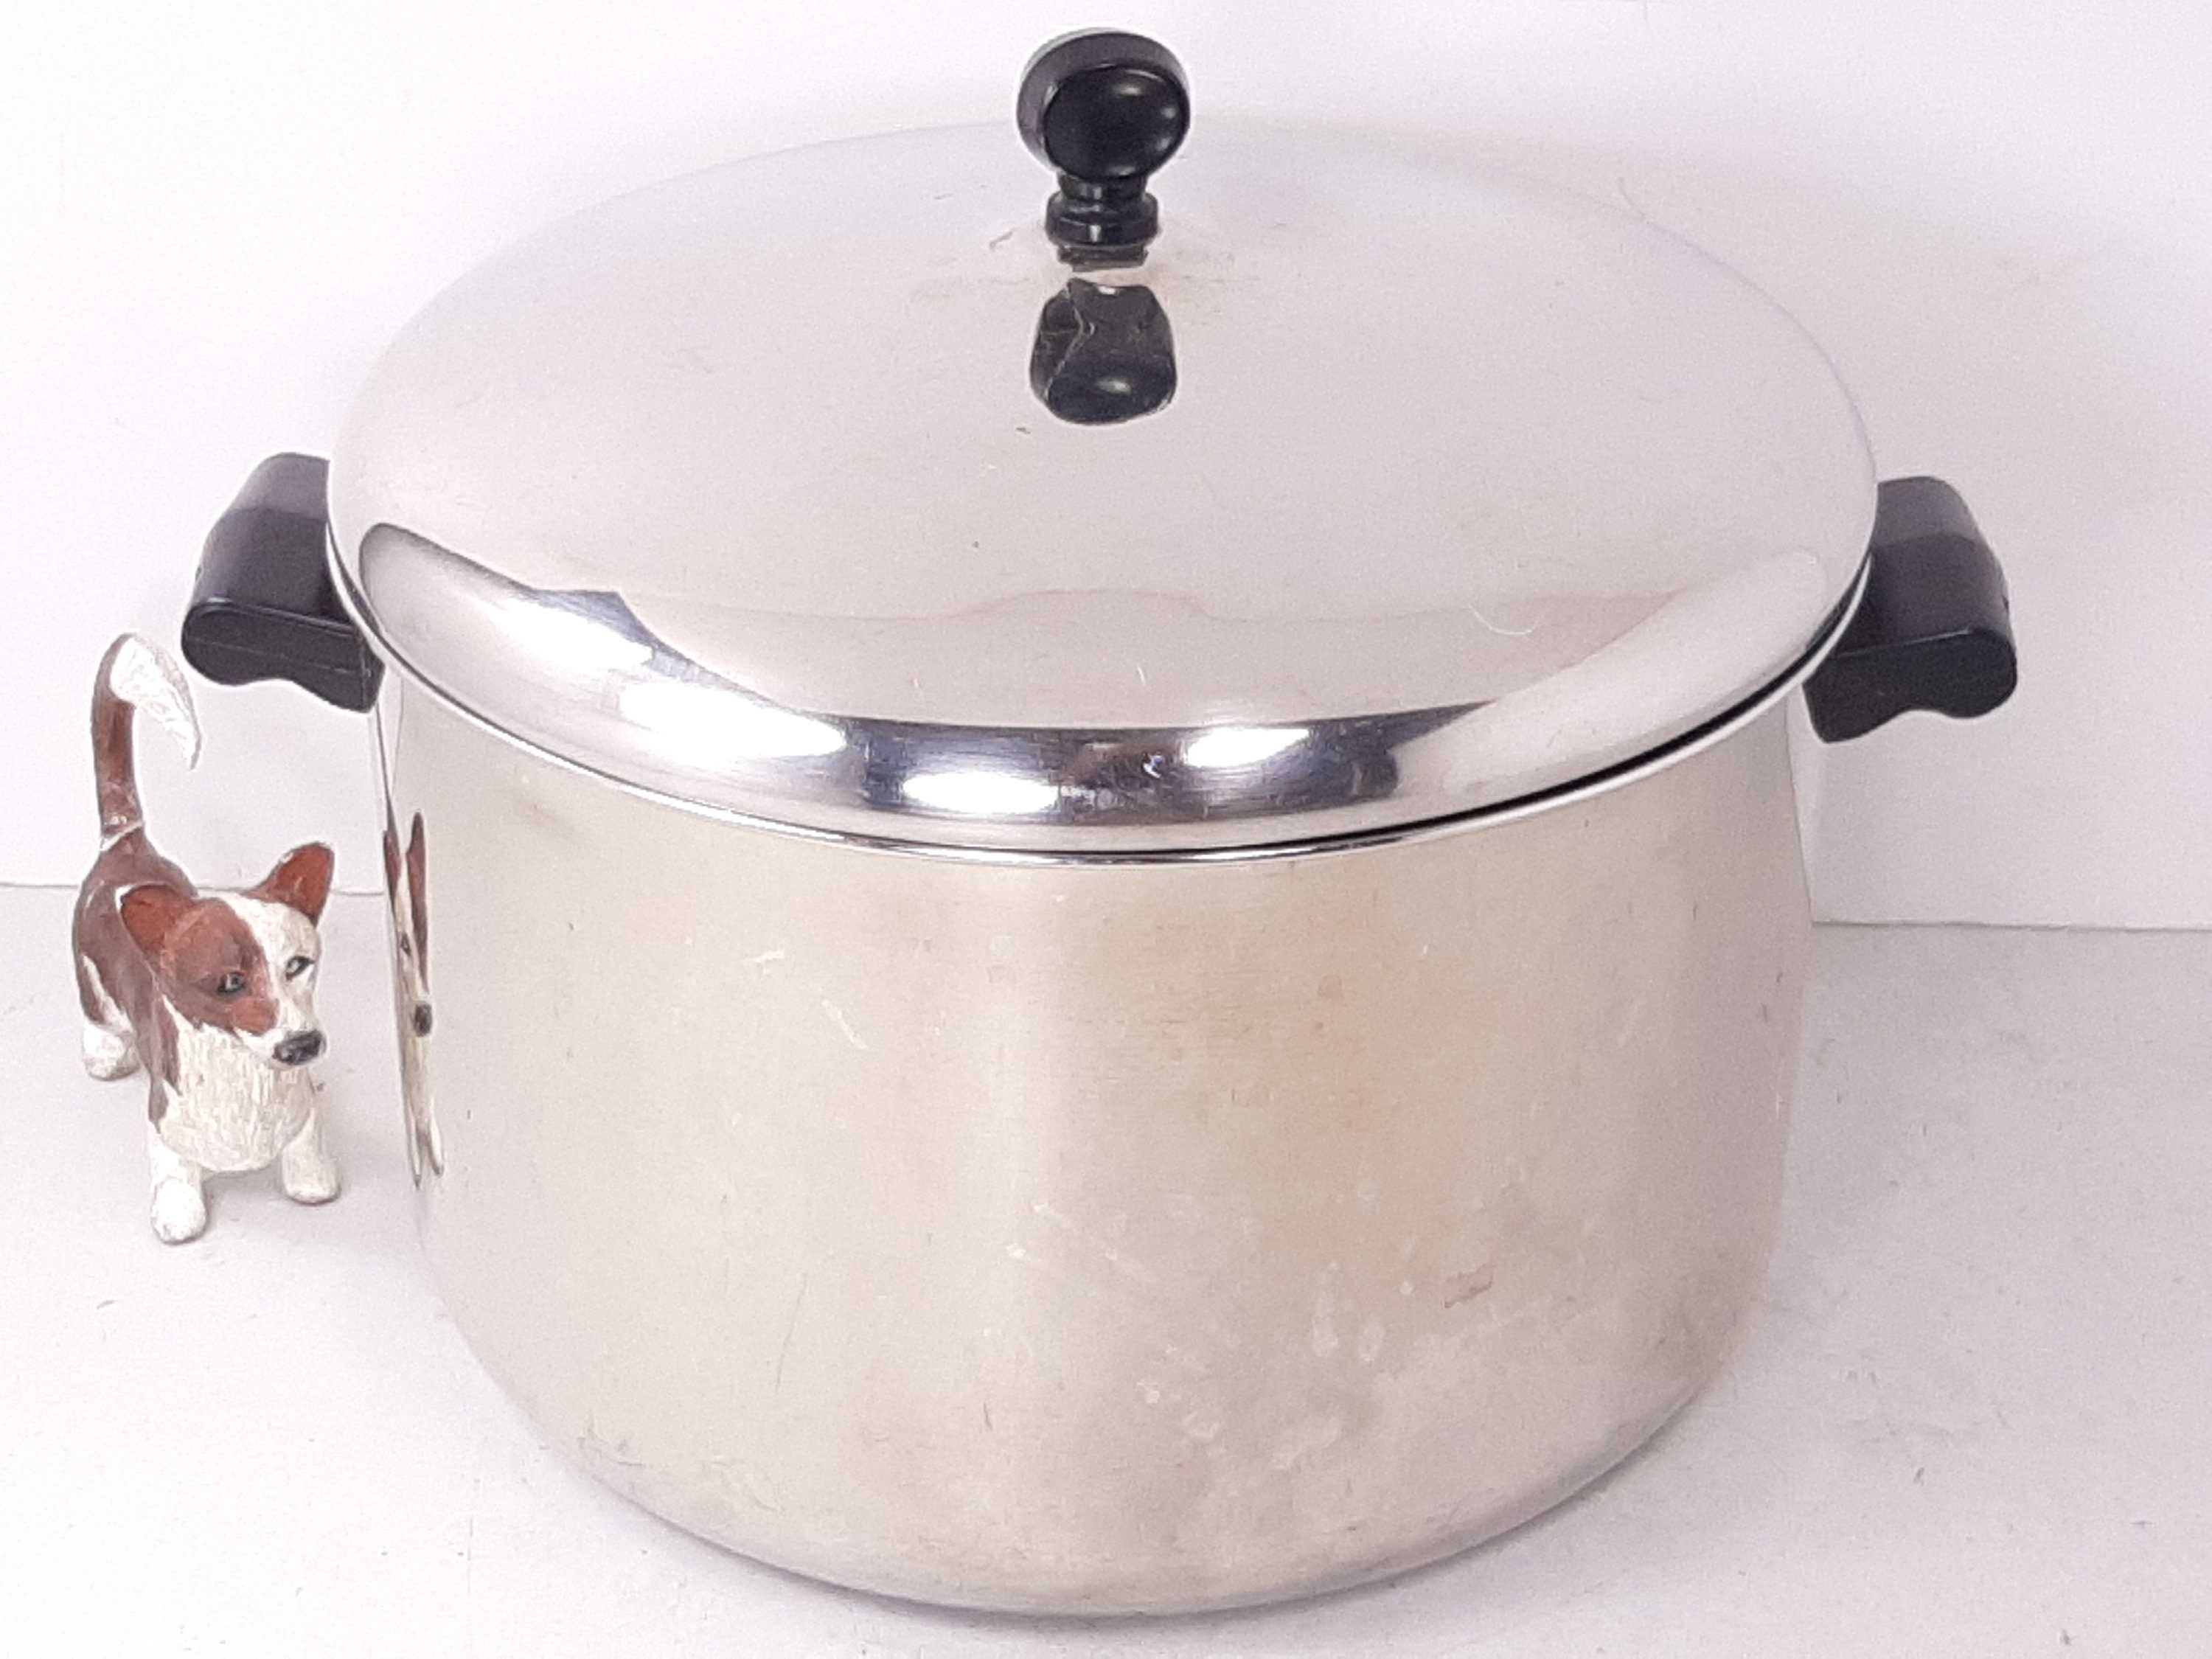 Ceramic Coated Aluminum 6qt Lidded Stock Pot with Steamer Insert - Made By  Design 6 qt